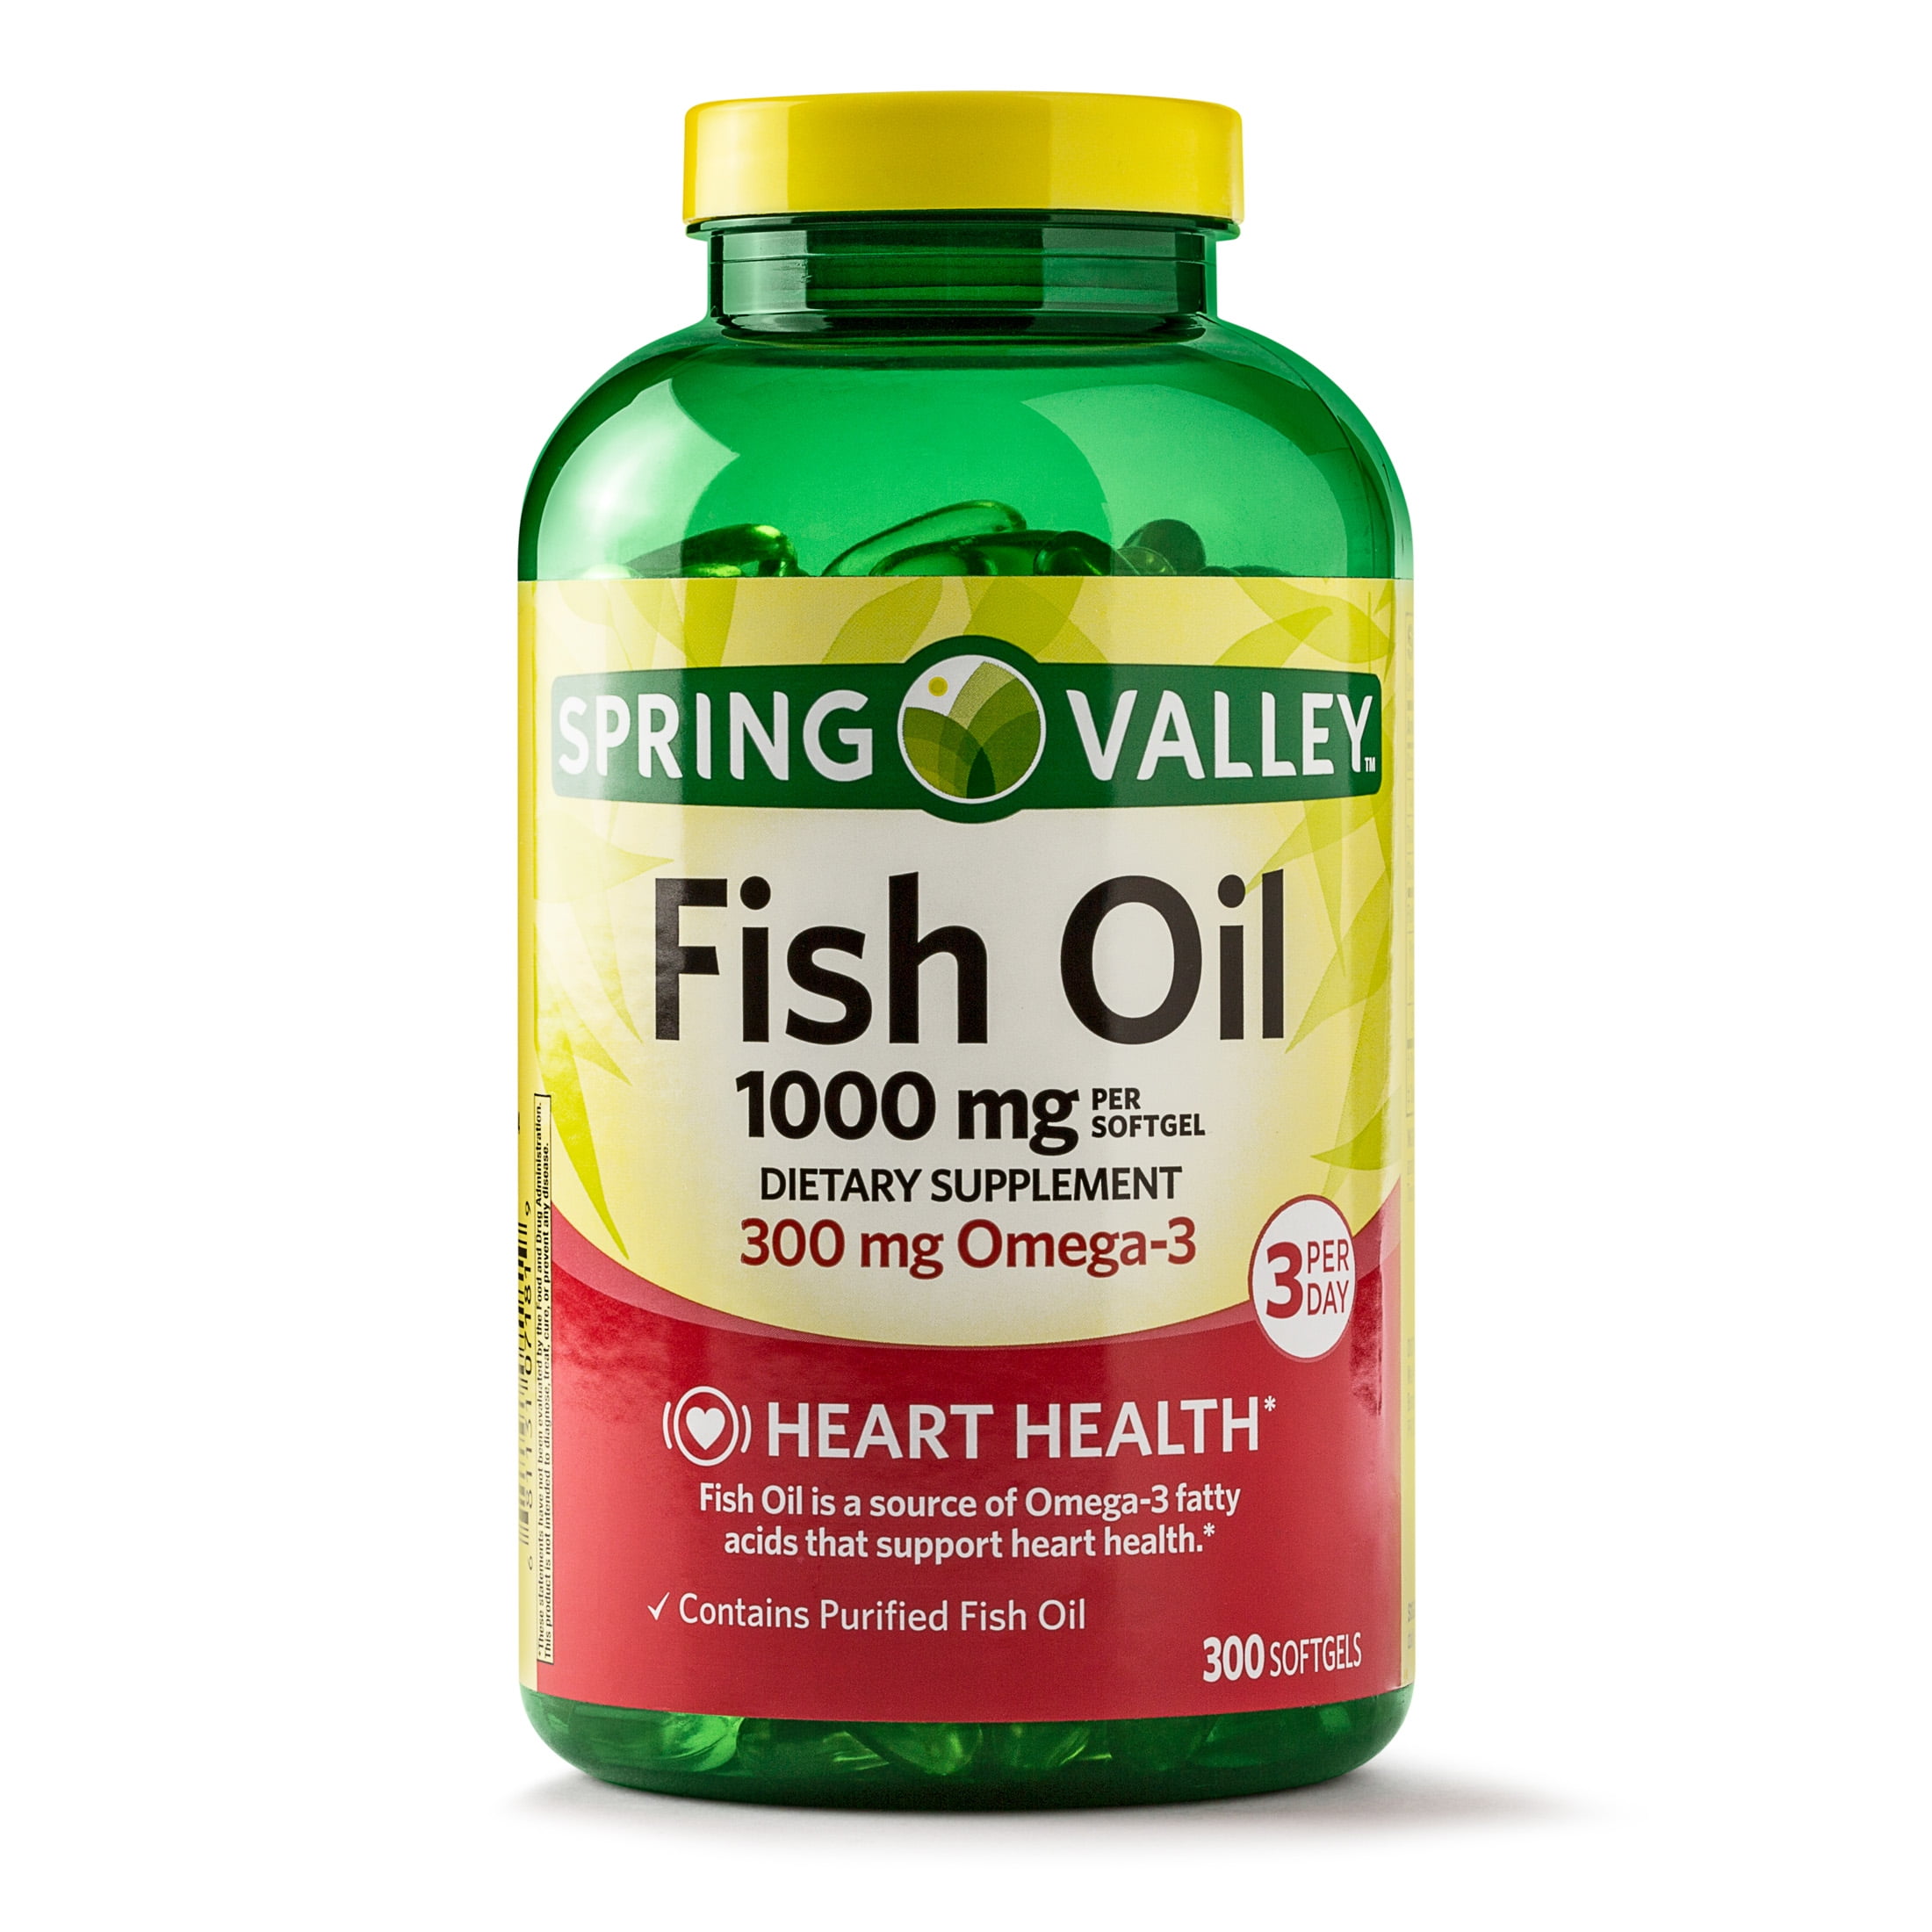 Spring Valley Fish Oil Omega-3 for Heart Health Softgels, 1000 mg, 300 ...